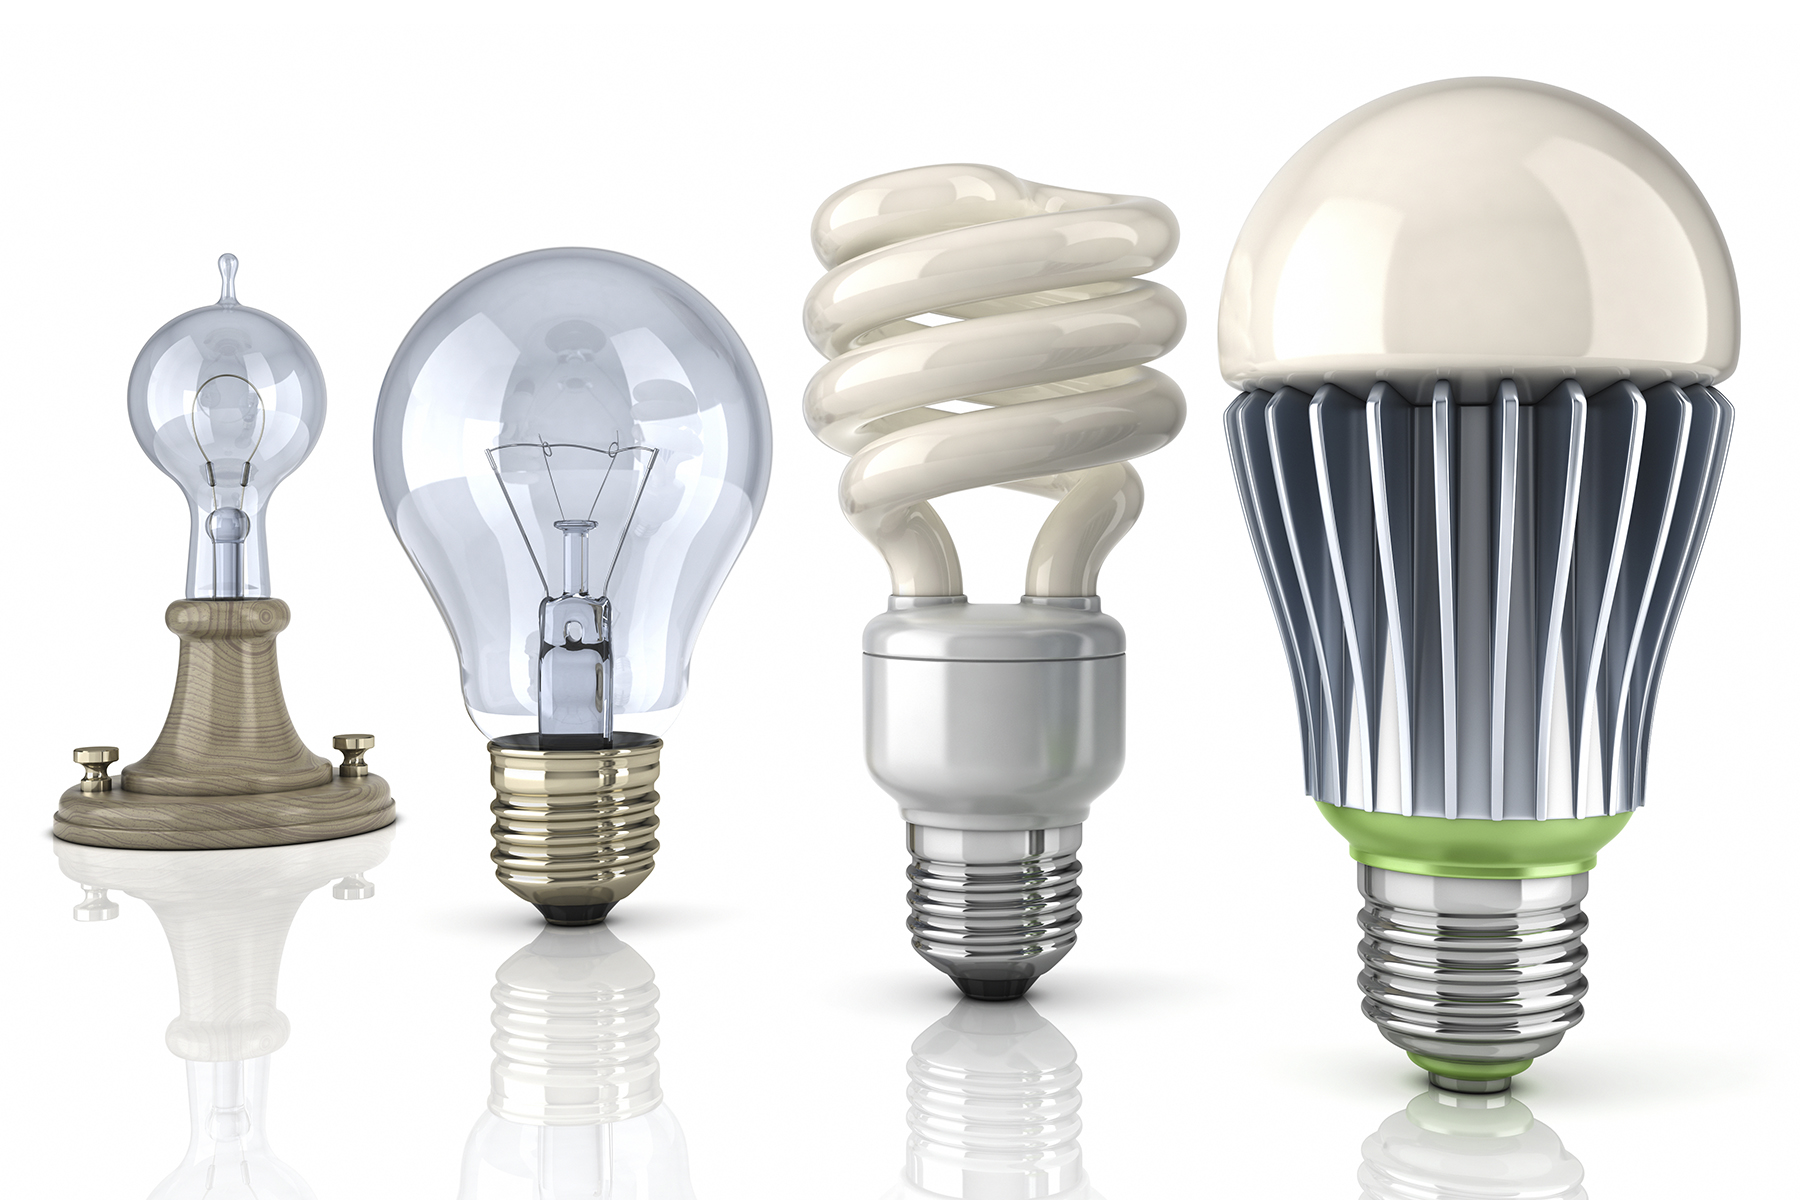 LED Light Bulbs vs. Incandescents and Fluorescents | HowStuffWorks